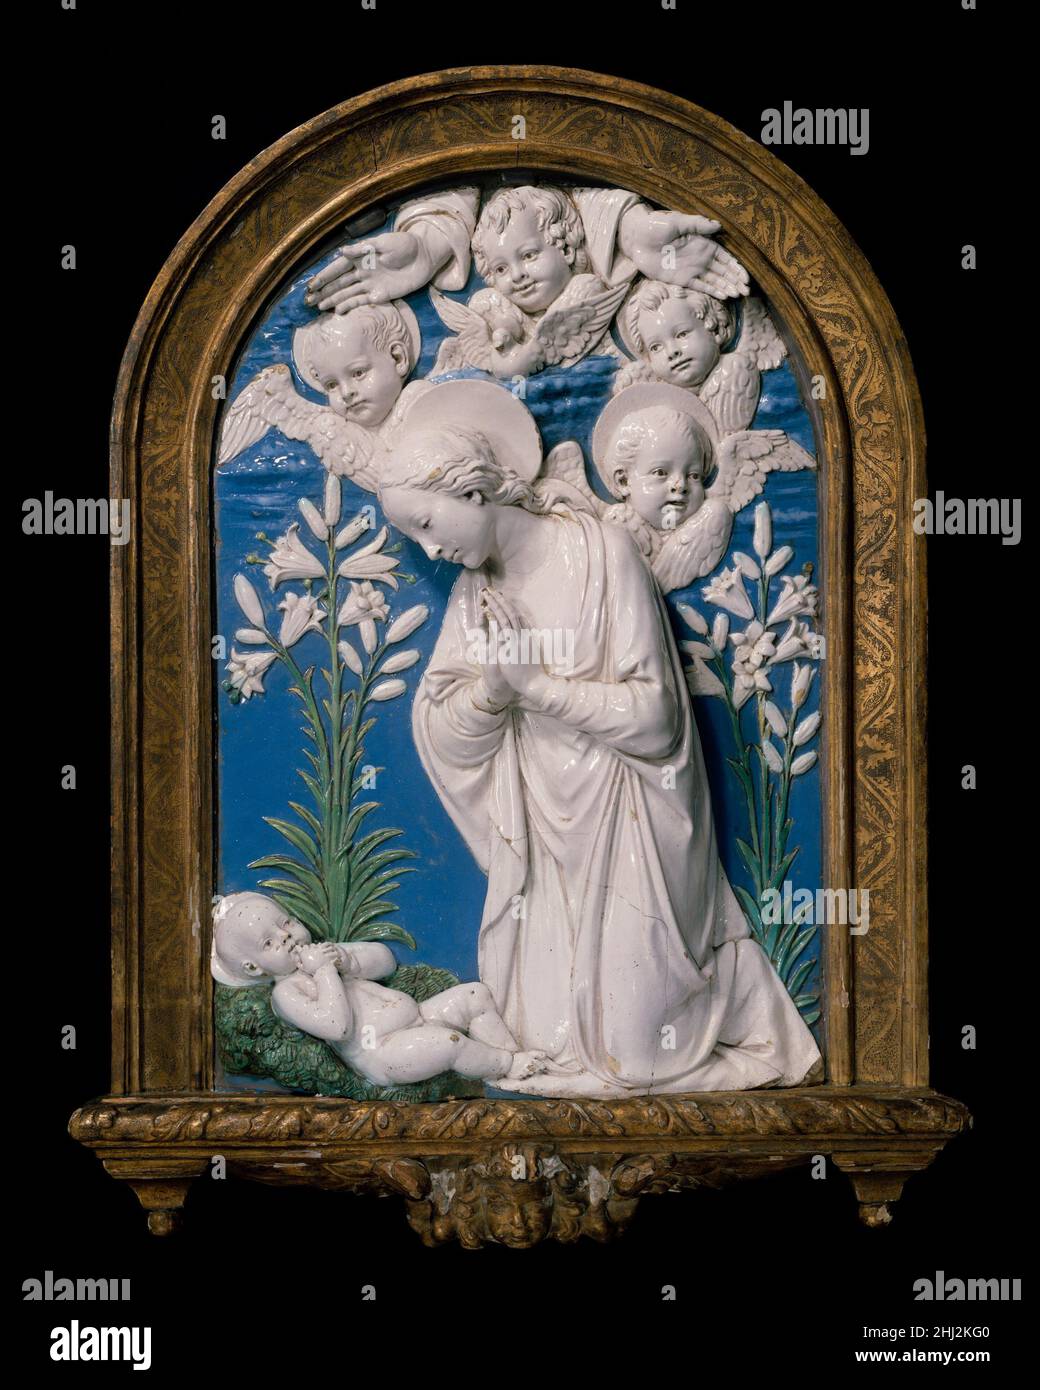 Virgin Adoring the Christ Child after 1479 Workshop of Andrea della Robbia Italian This is a possibly unique variant of several types of variants deriving from the so-called La Verna altarpiece, executed by Andrea del Robbia in 1479 for the Brizi Chapel in the Chiesa Maggiore at La Verna. See also 65.181.24 and 39.186.2. Gilt wood frame not original.. Virgin Adoring the Christ Child. Workshop of Andrea della Robbia (Italian, 1435–1525). Italian, Florence. after 1479. Glazed terracotta. Sculpture Stock Photo